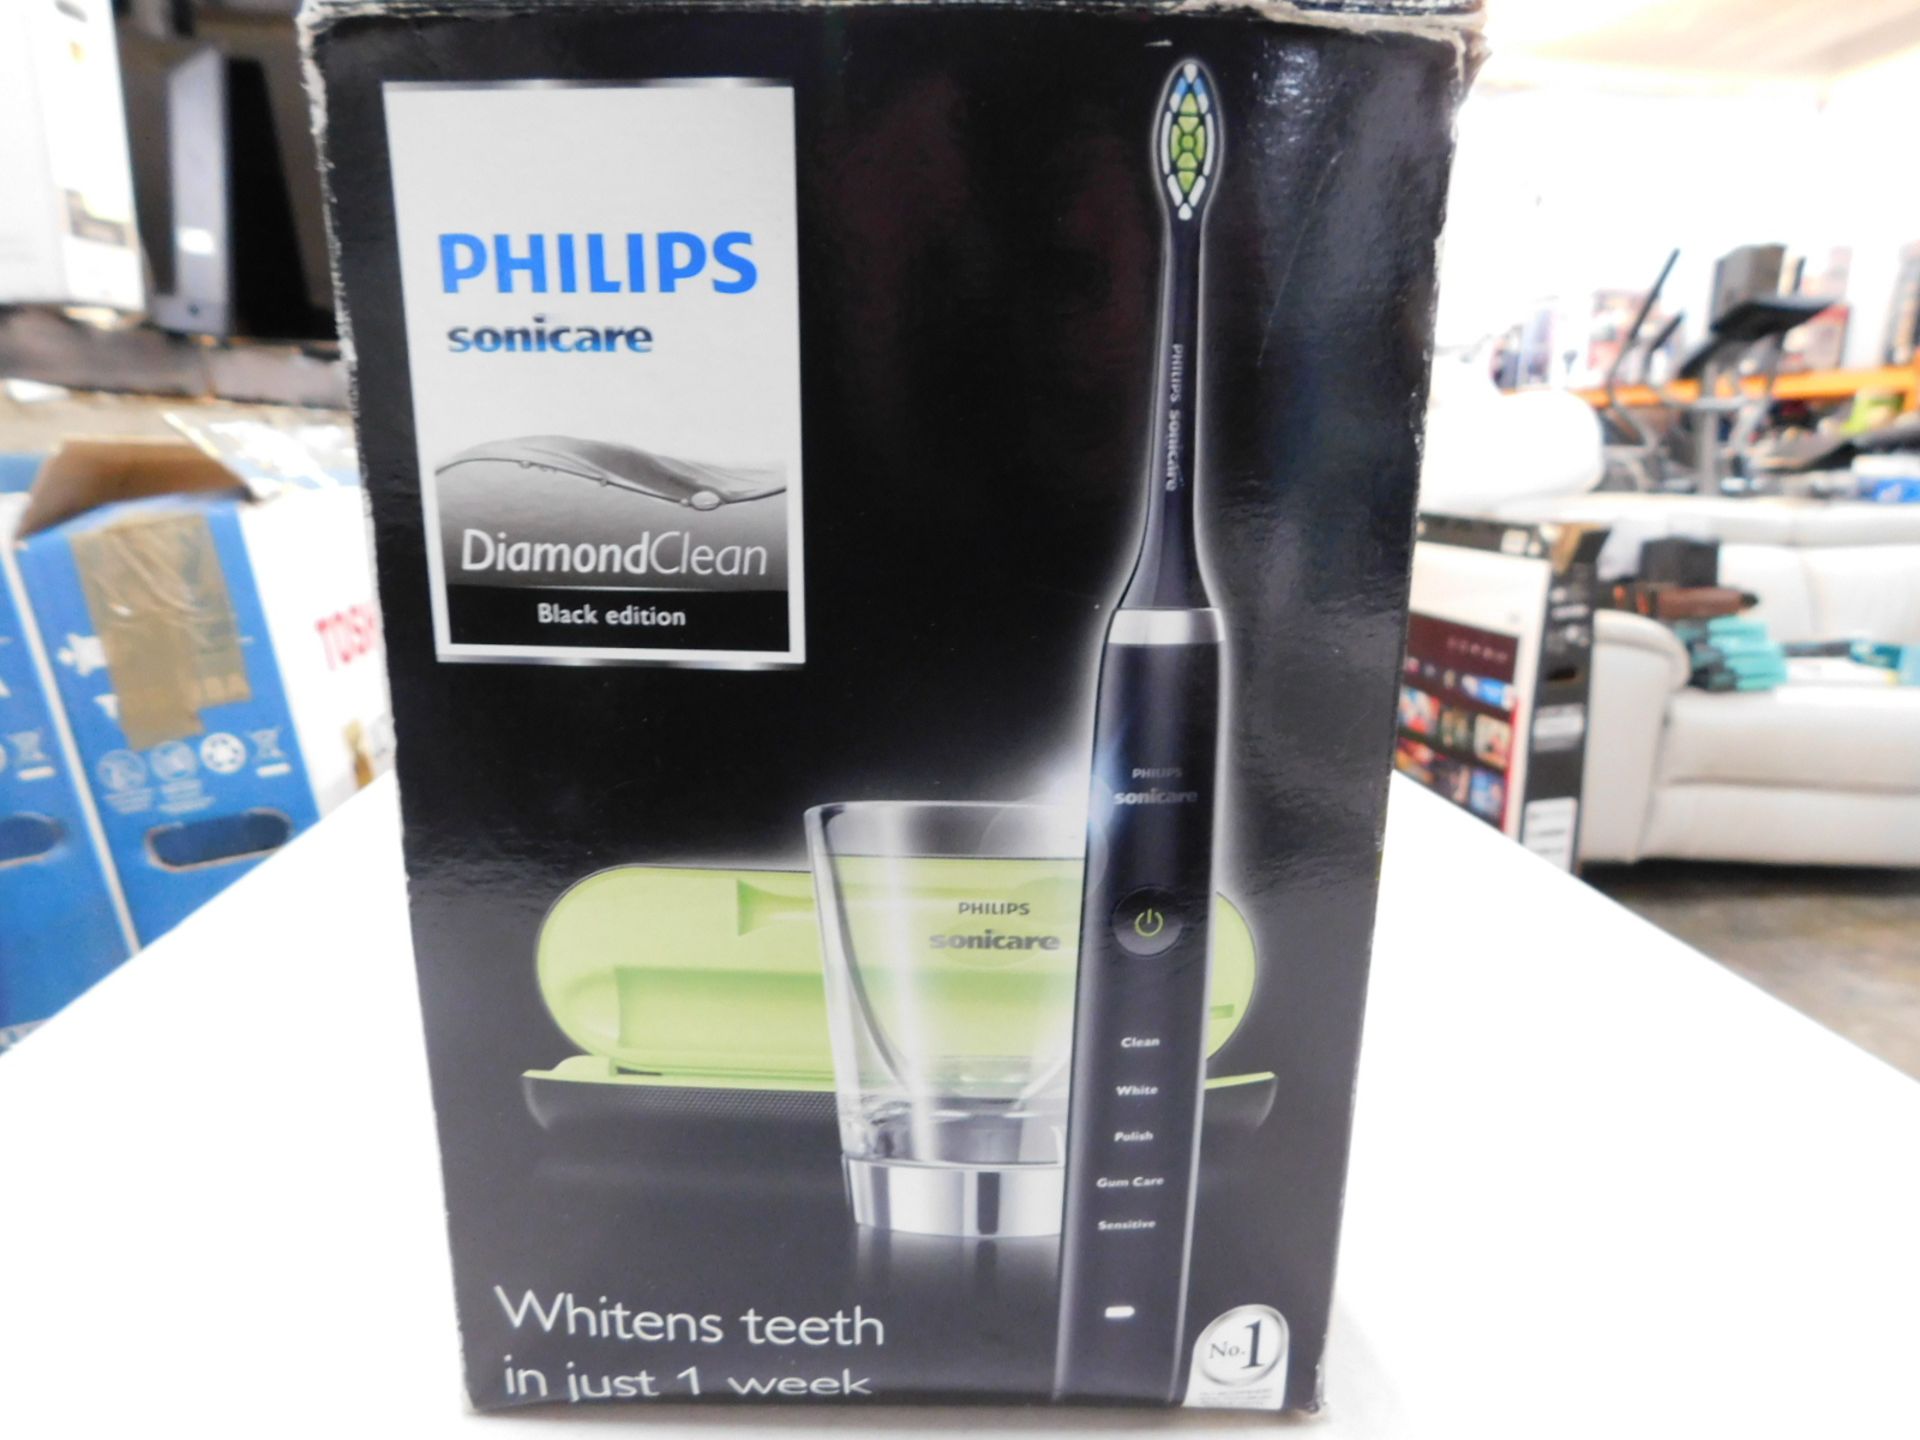 1 BOXED PHILIPS SONICARE DIAMOND CLEAN BLACK EDITION ELECTRIC TOOTHBRUSH RRP Â£199